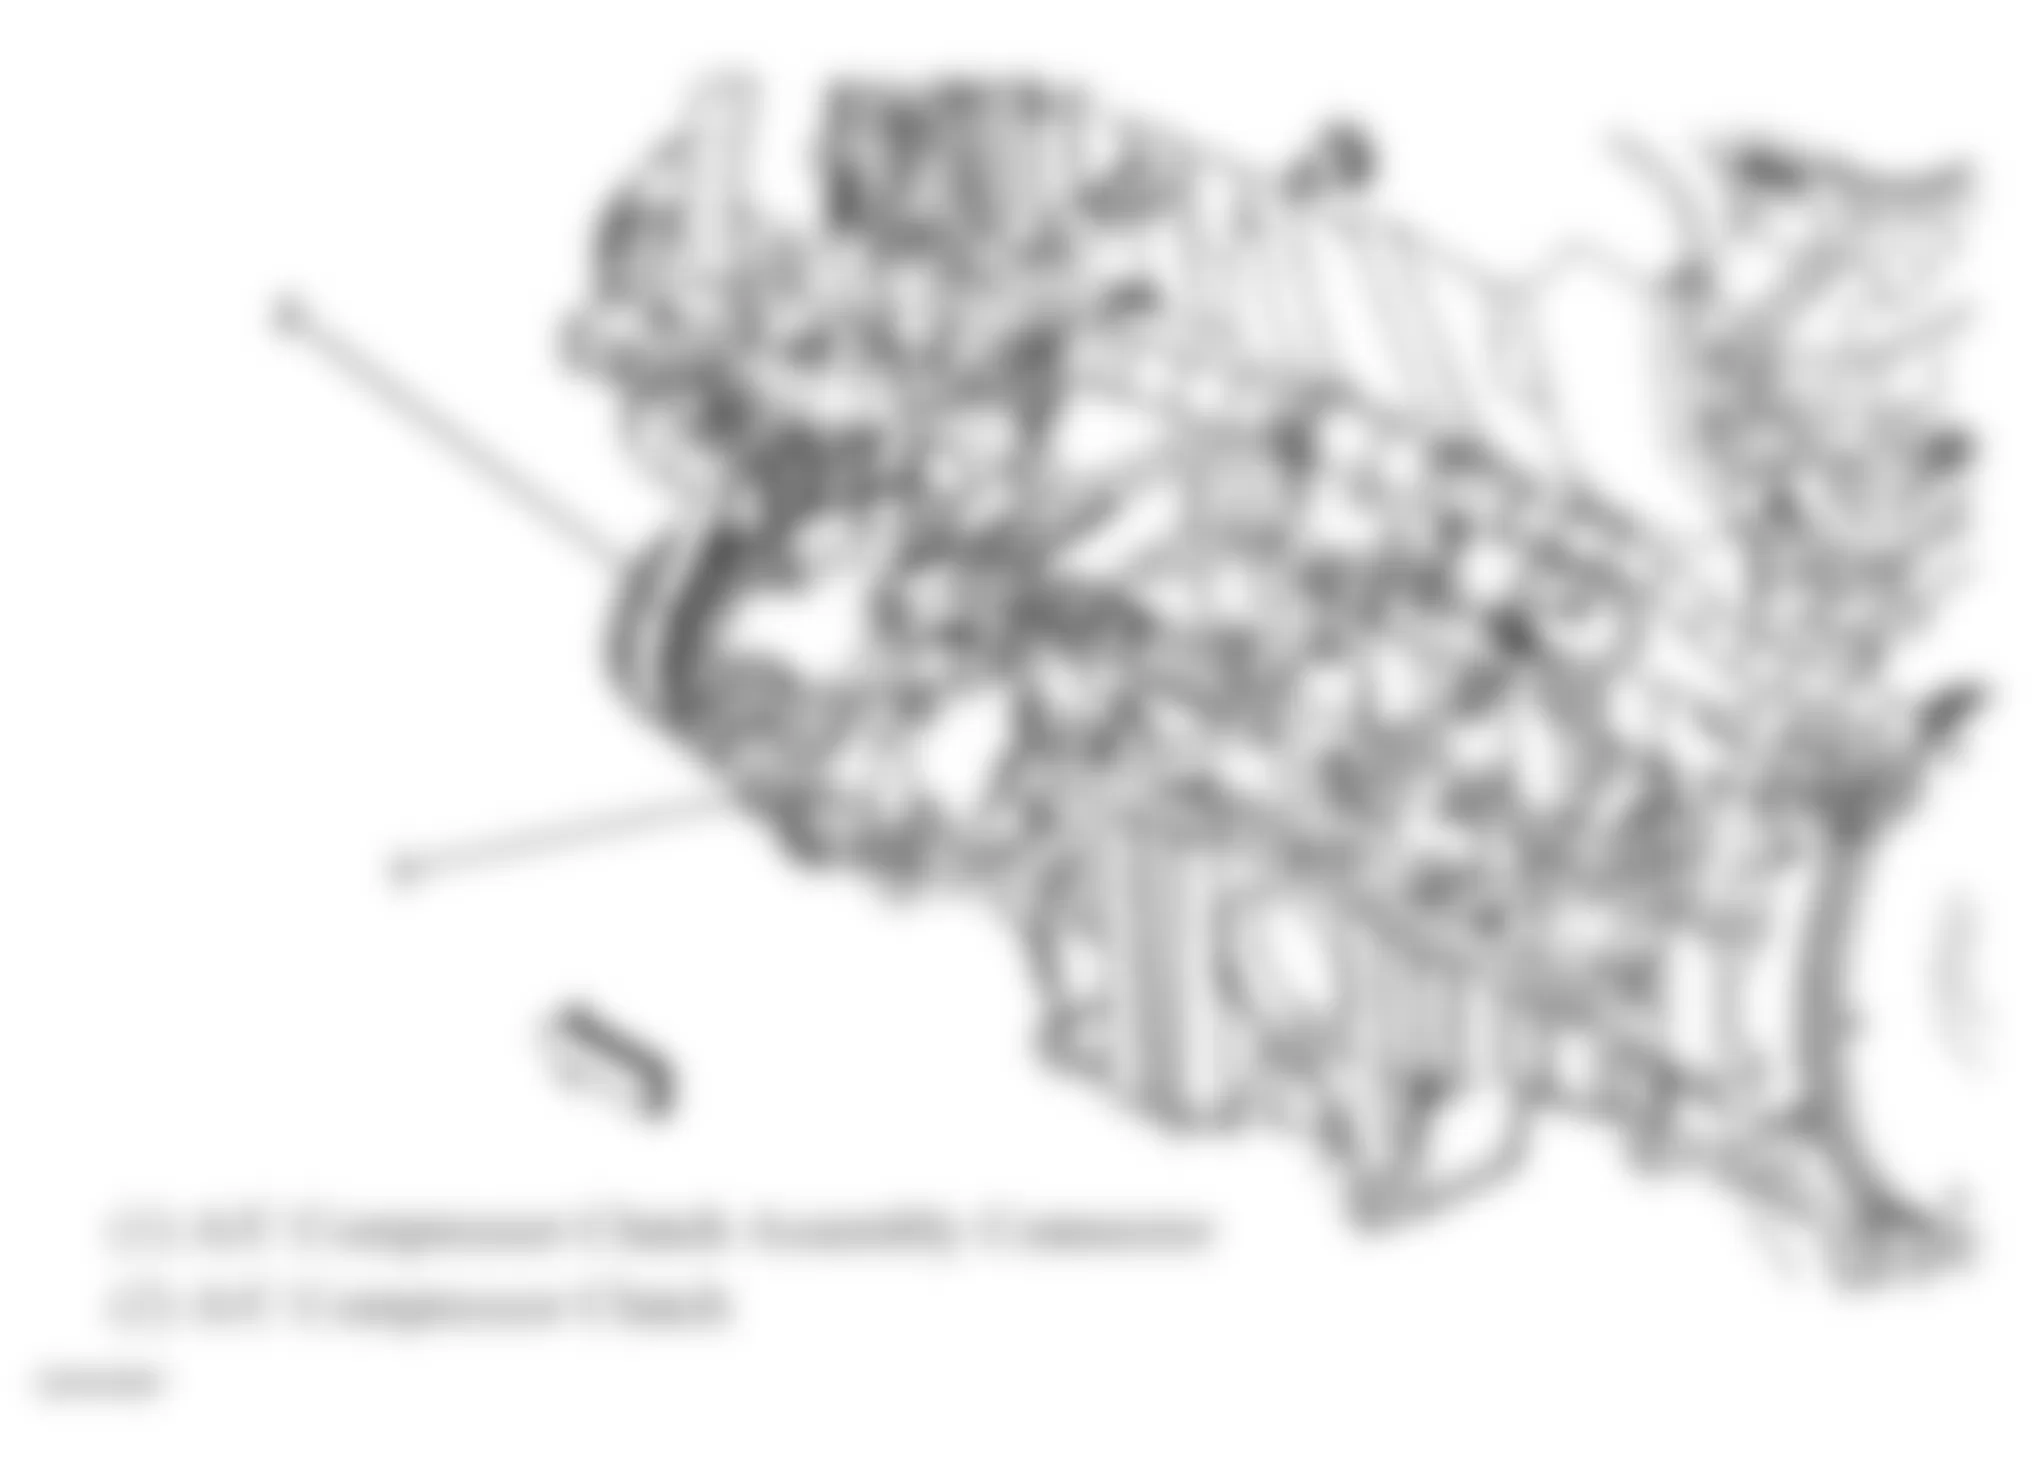 GMC Envoy 2008 - Component Locations -  Lower Left Side Of Engine (4.2L)